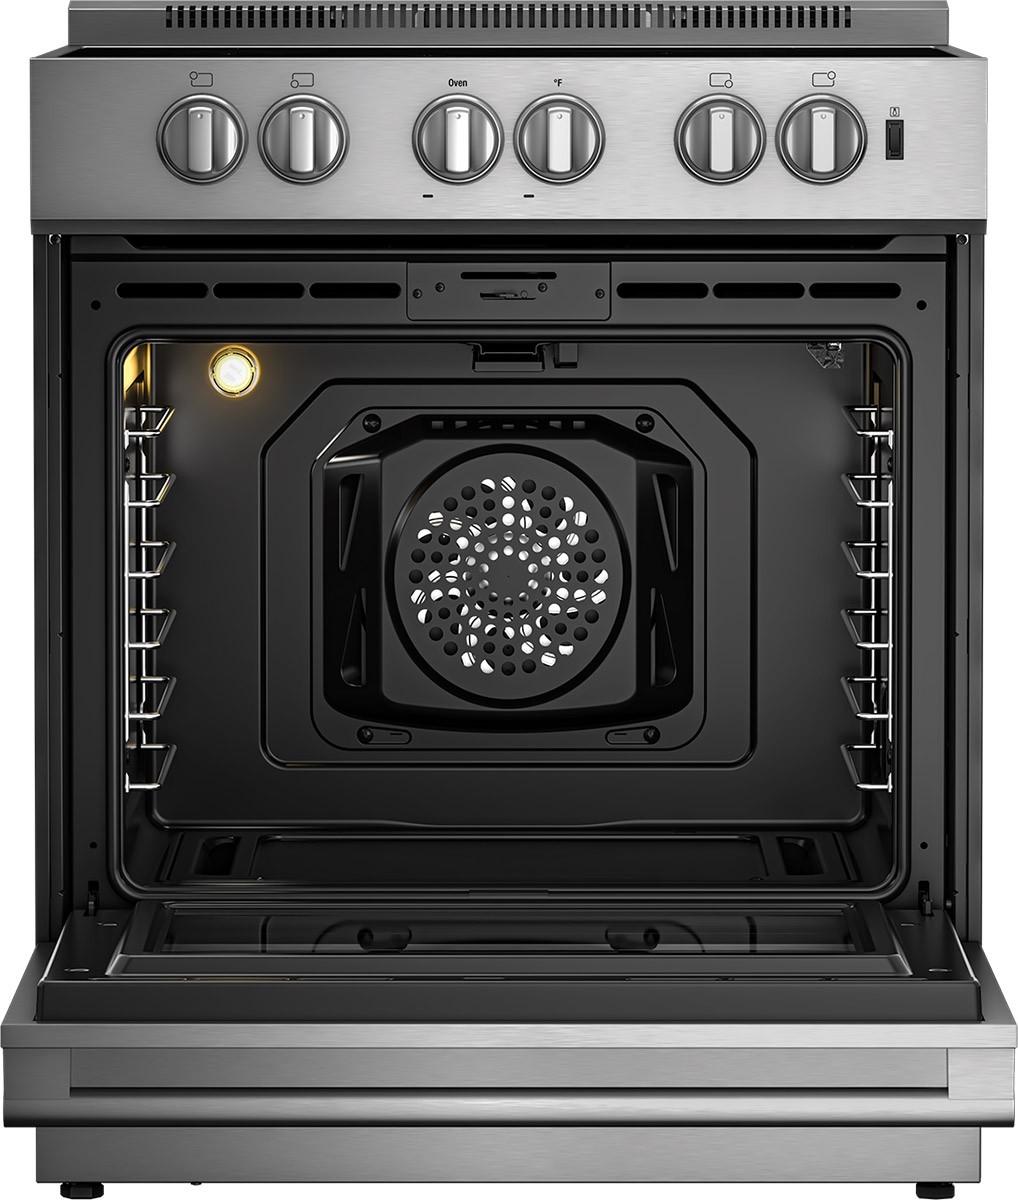 Blomberg Appliances BIR34452SS 30In Induction Range With 5.7 Cu Ft Self Clean Oven, Slide-In Style